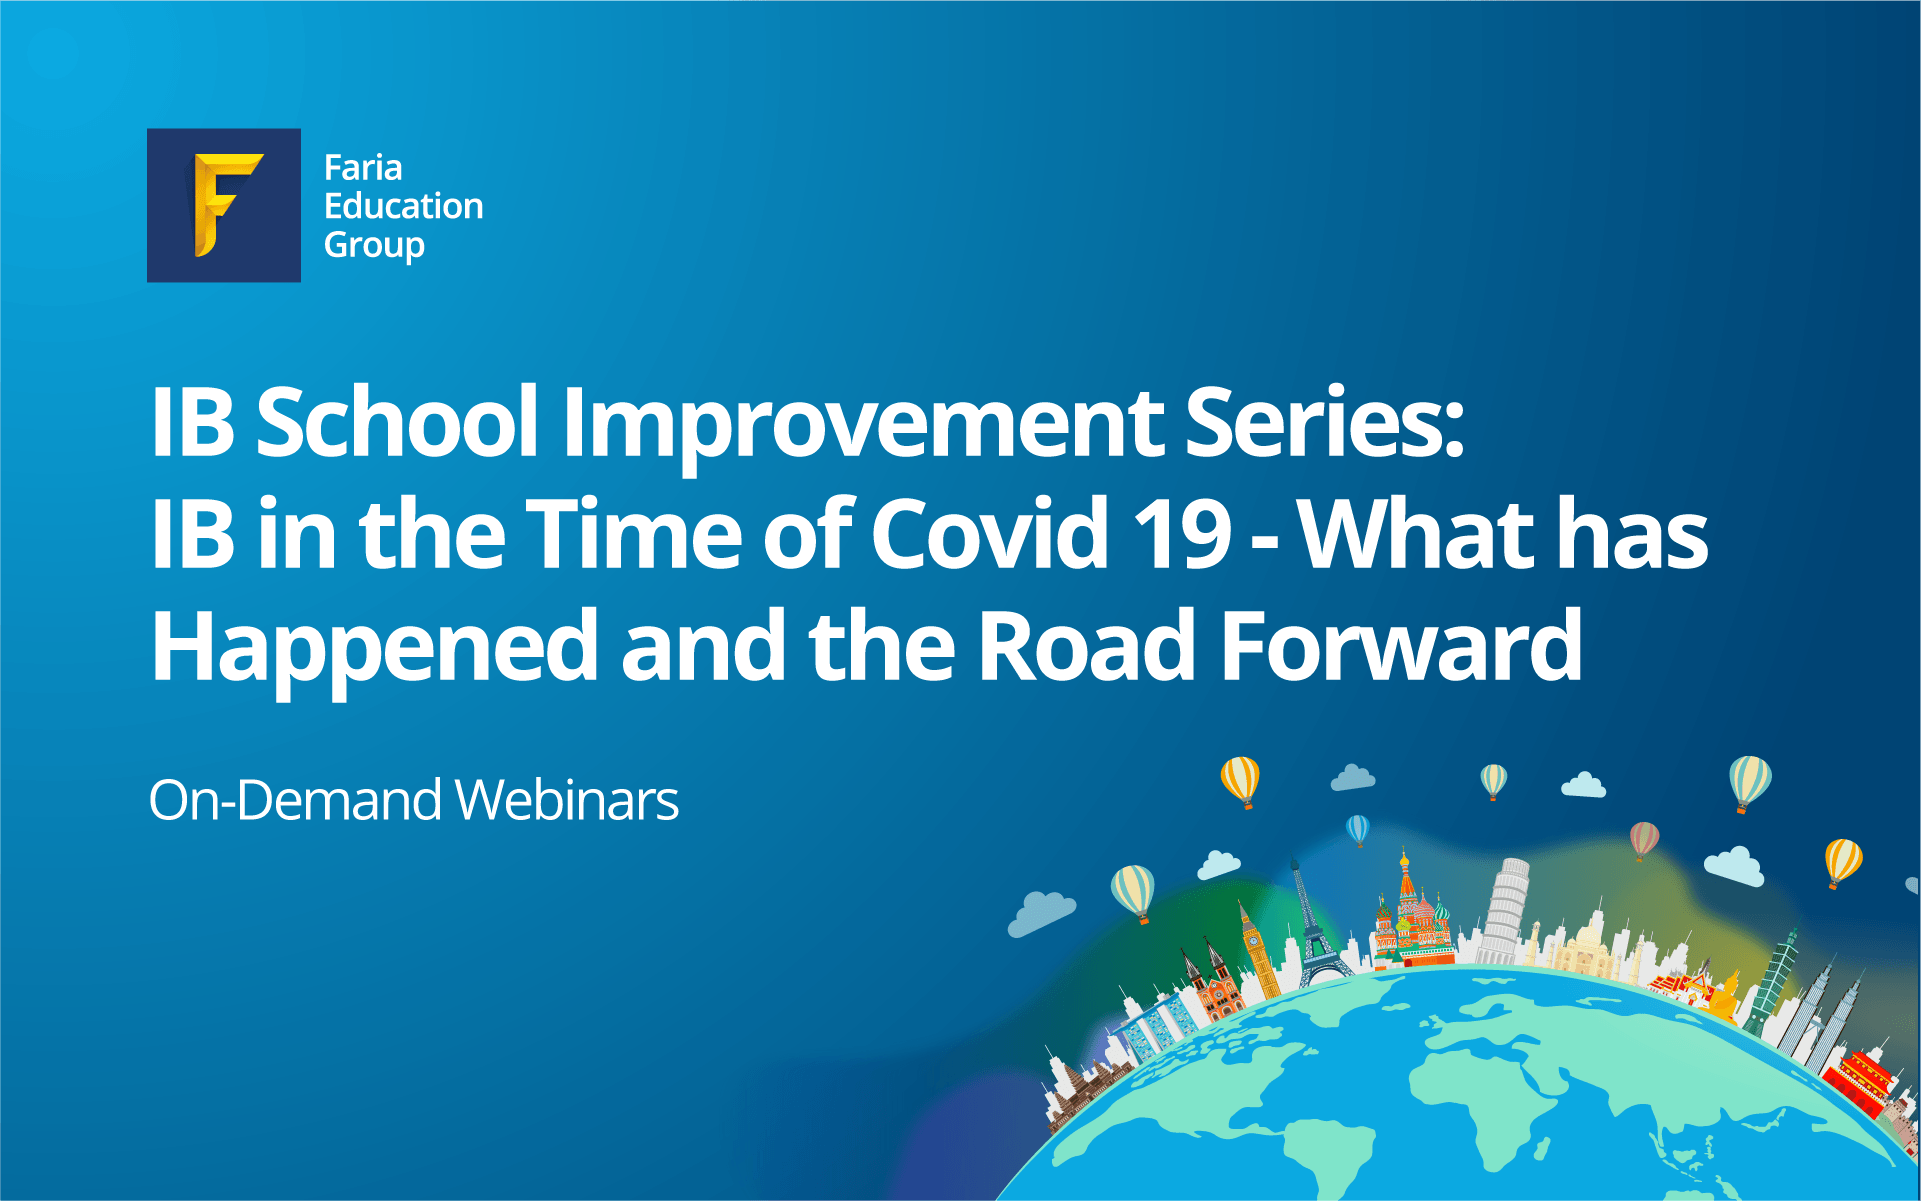 IB School Improvement Series: IB in the Time of Covid 19 – What has happened and the Road Forward